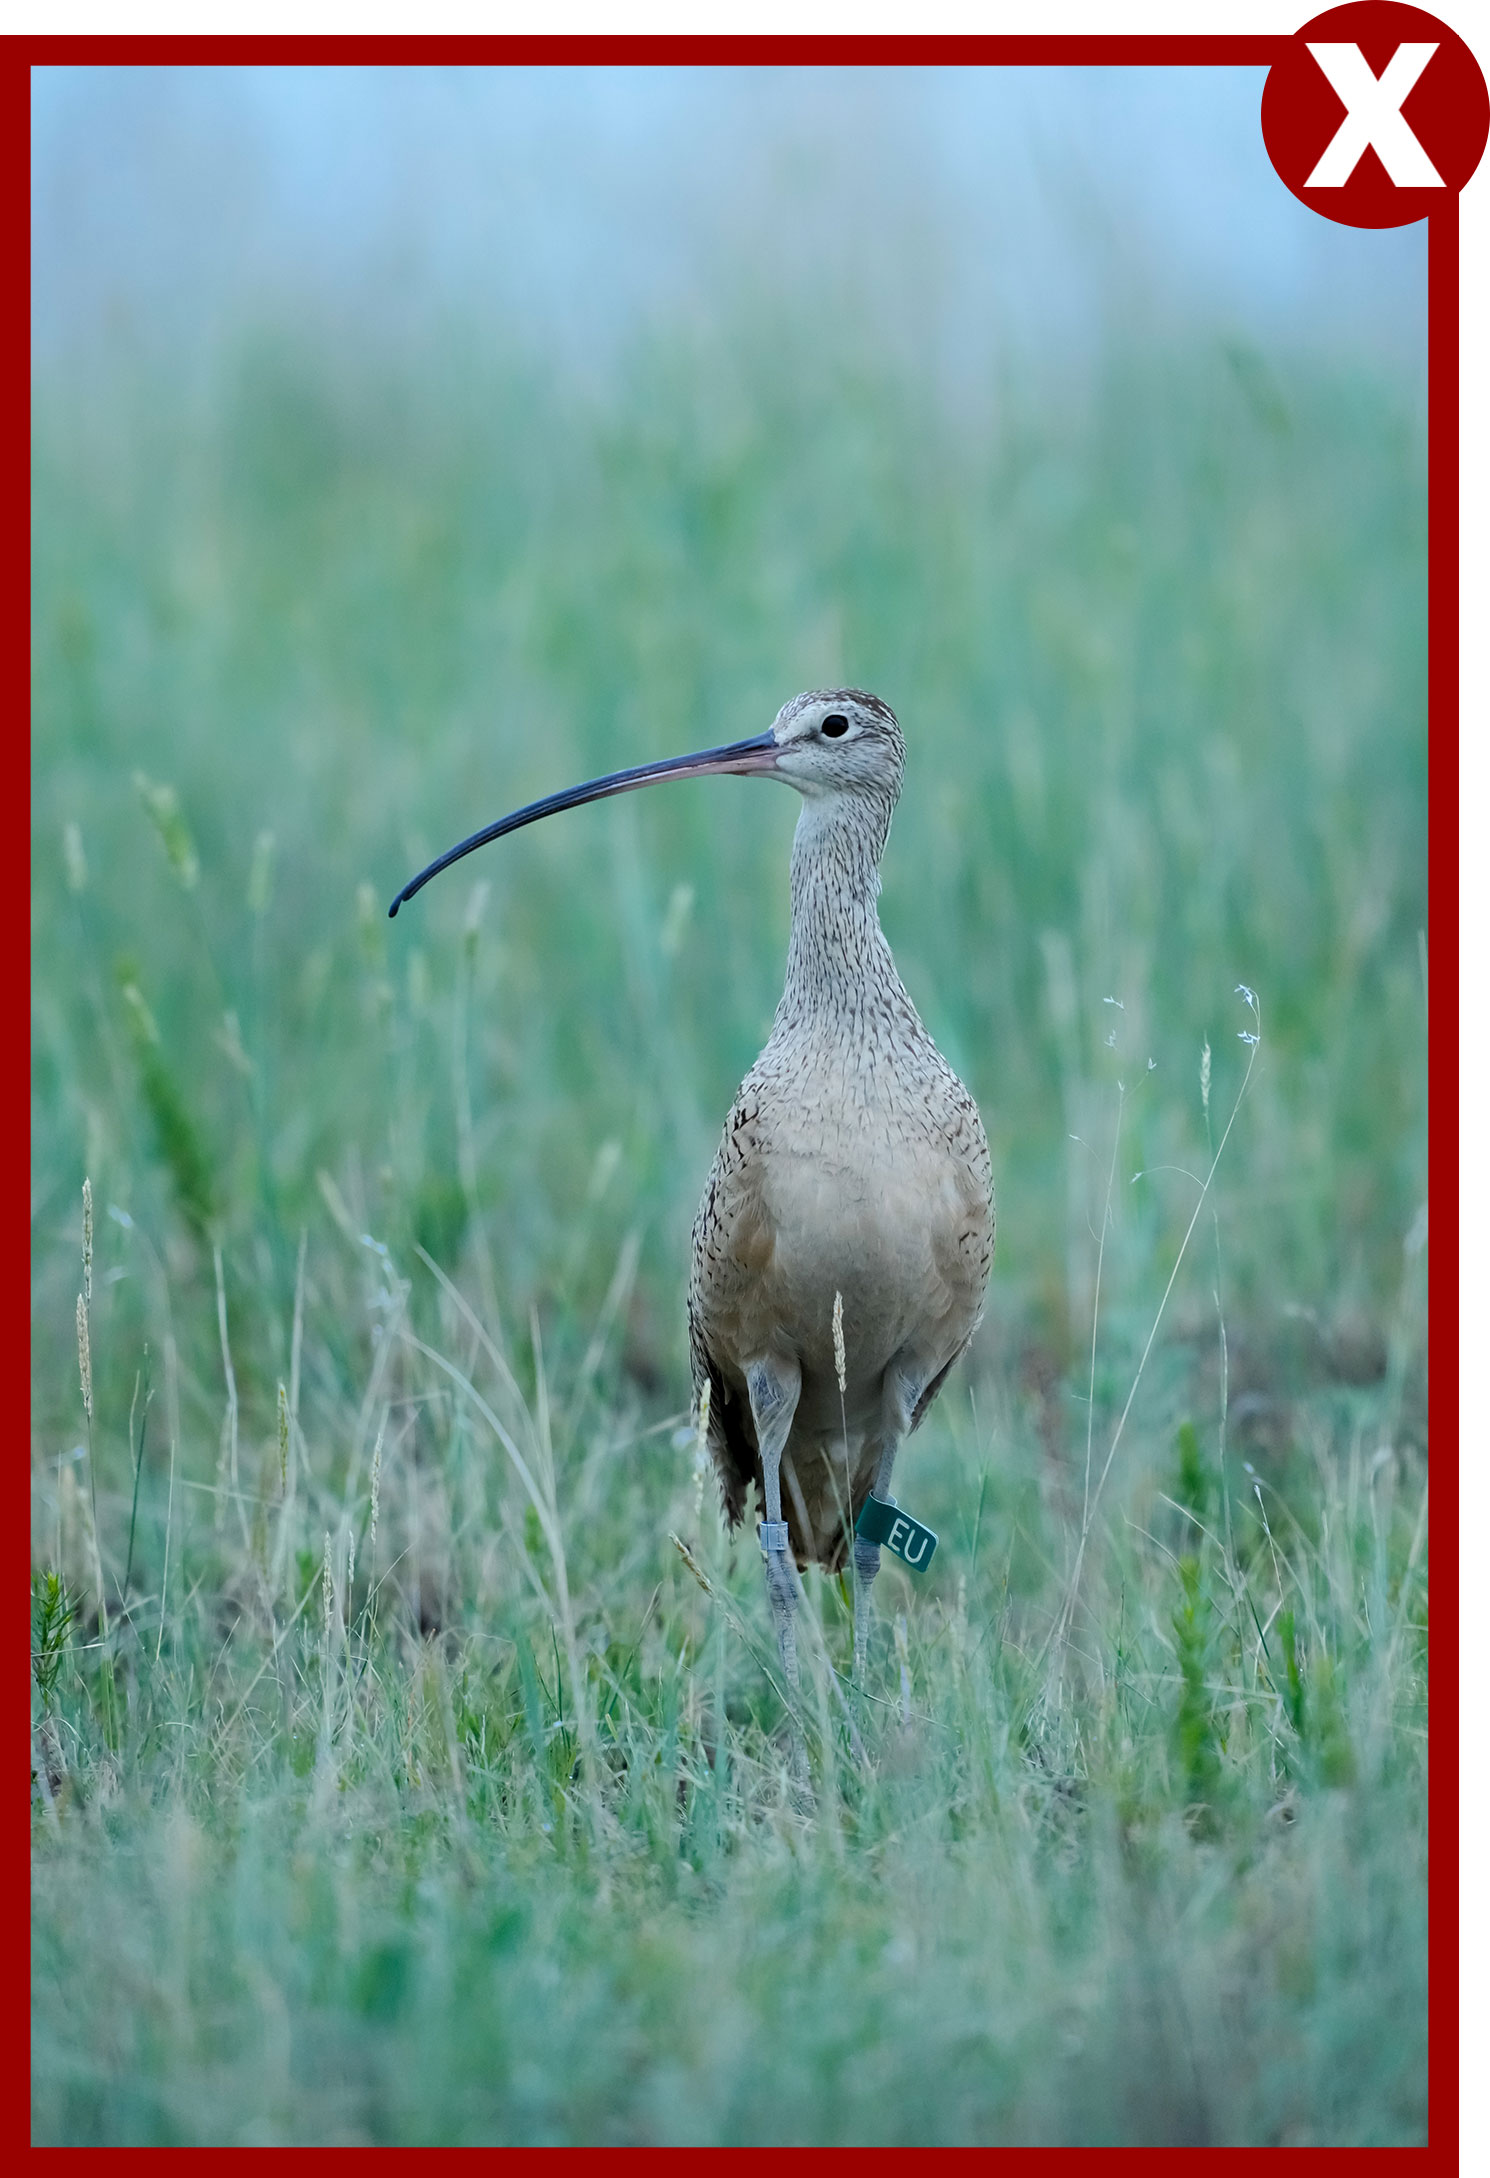 Vertical curlew image